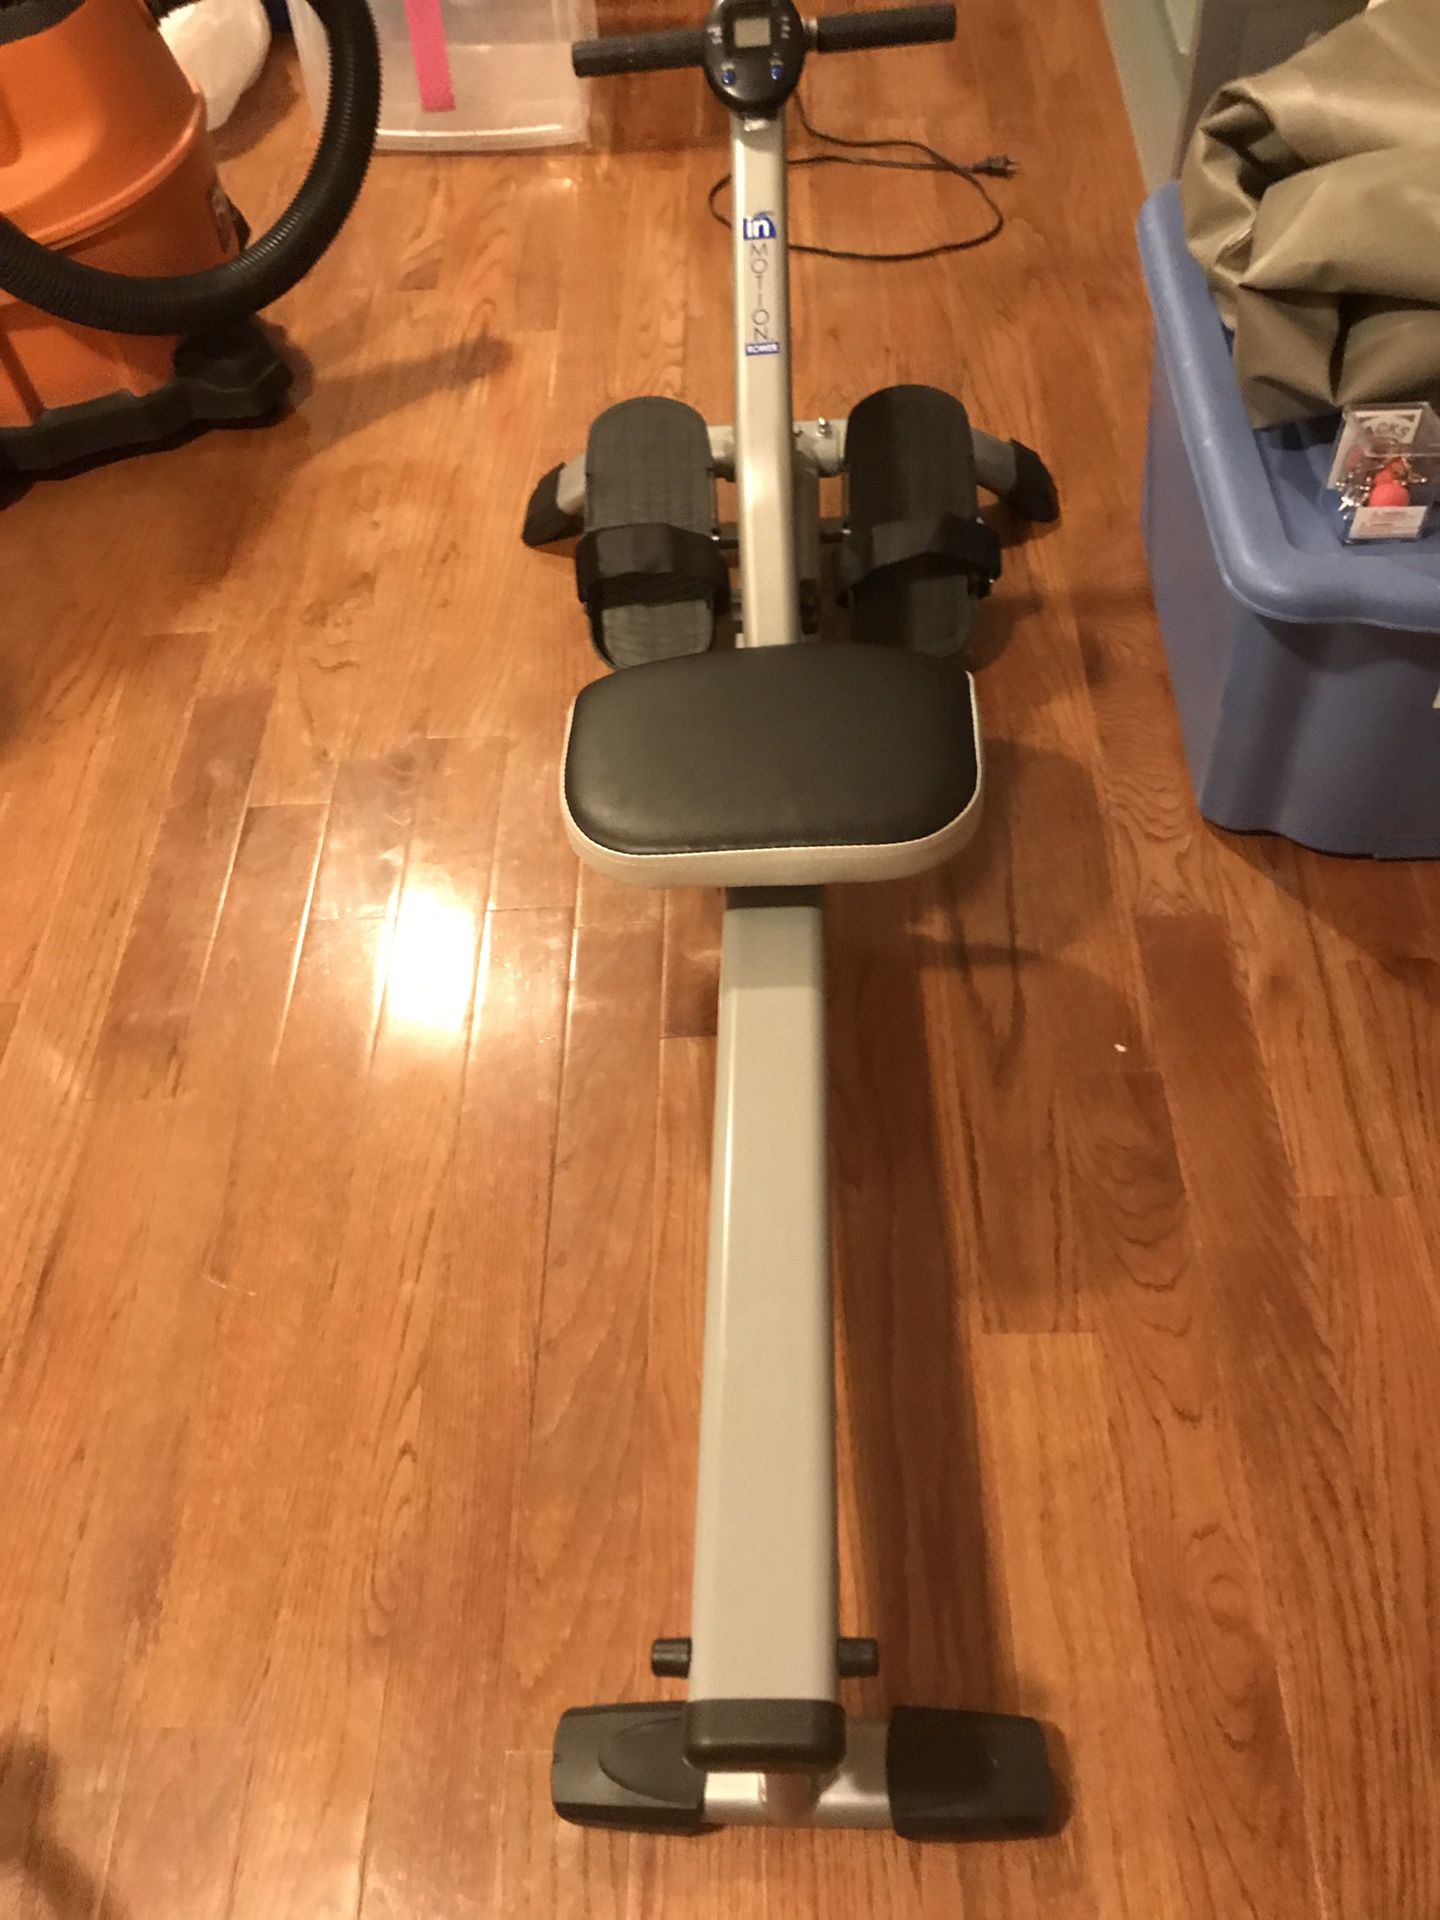 Rowing machine (from Sharper Image)